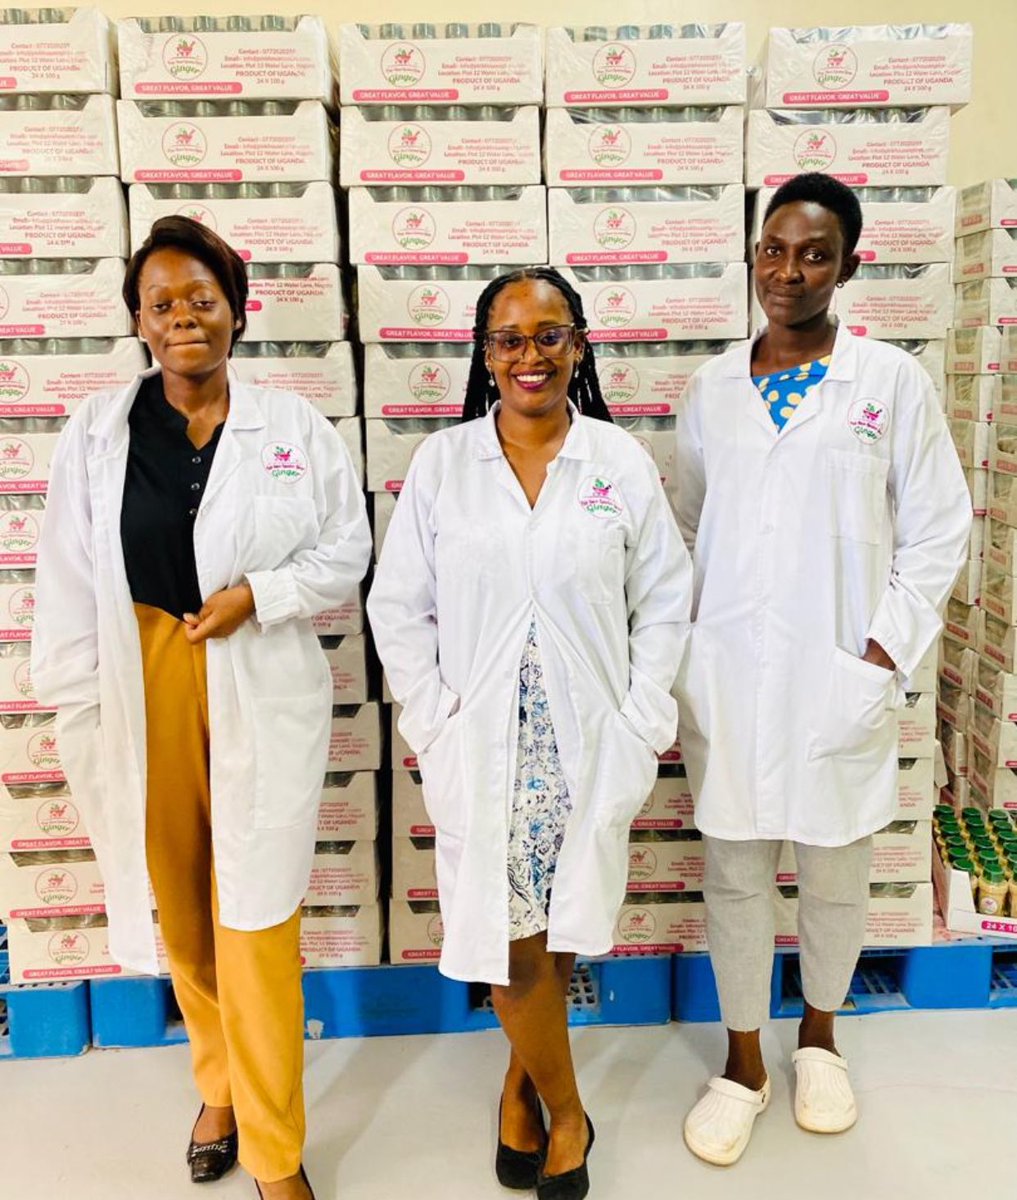 Highlights from due diligence visit to Pink House Spices Ltd, one of the #NSSFHiInnovator winners.

Pink house spices  produces and delivers premium spice products and solutions

@OutboxHub @MastercardFdn @nssfug @CMbertudde